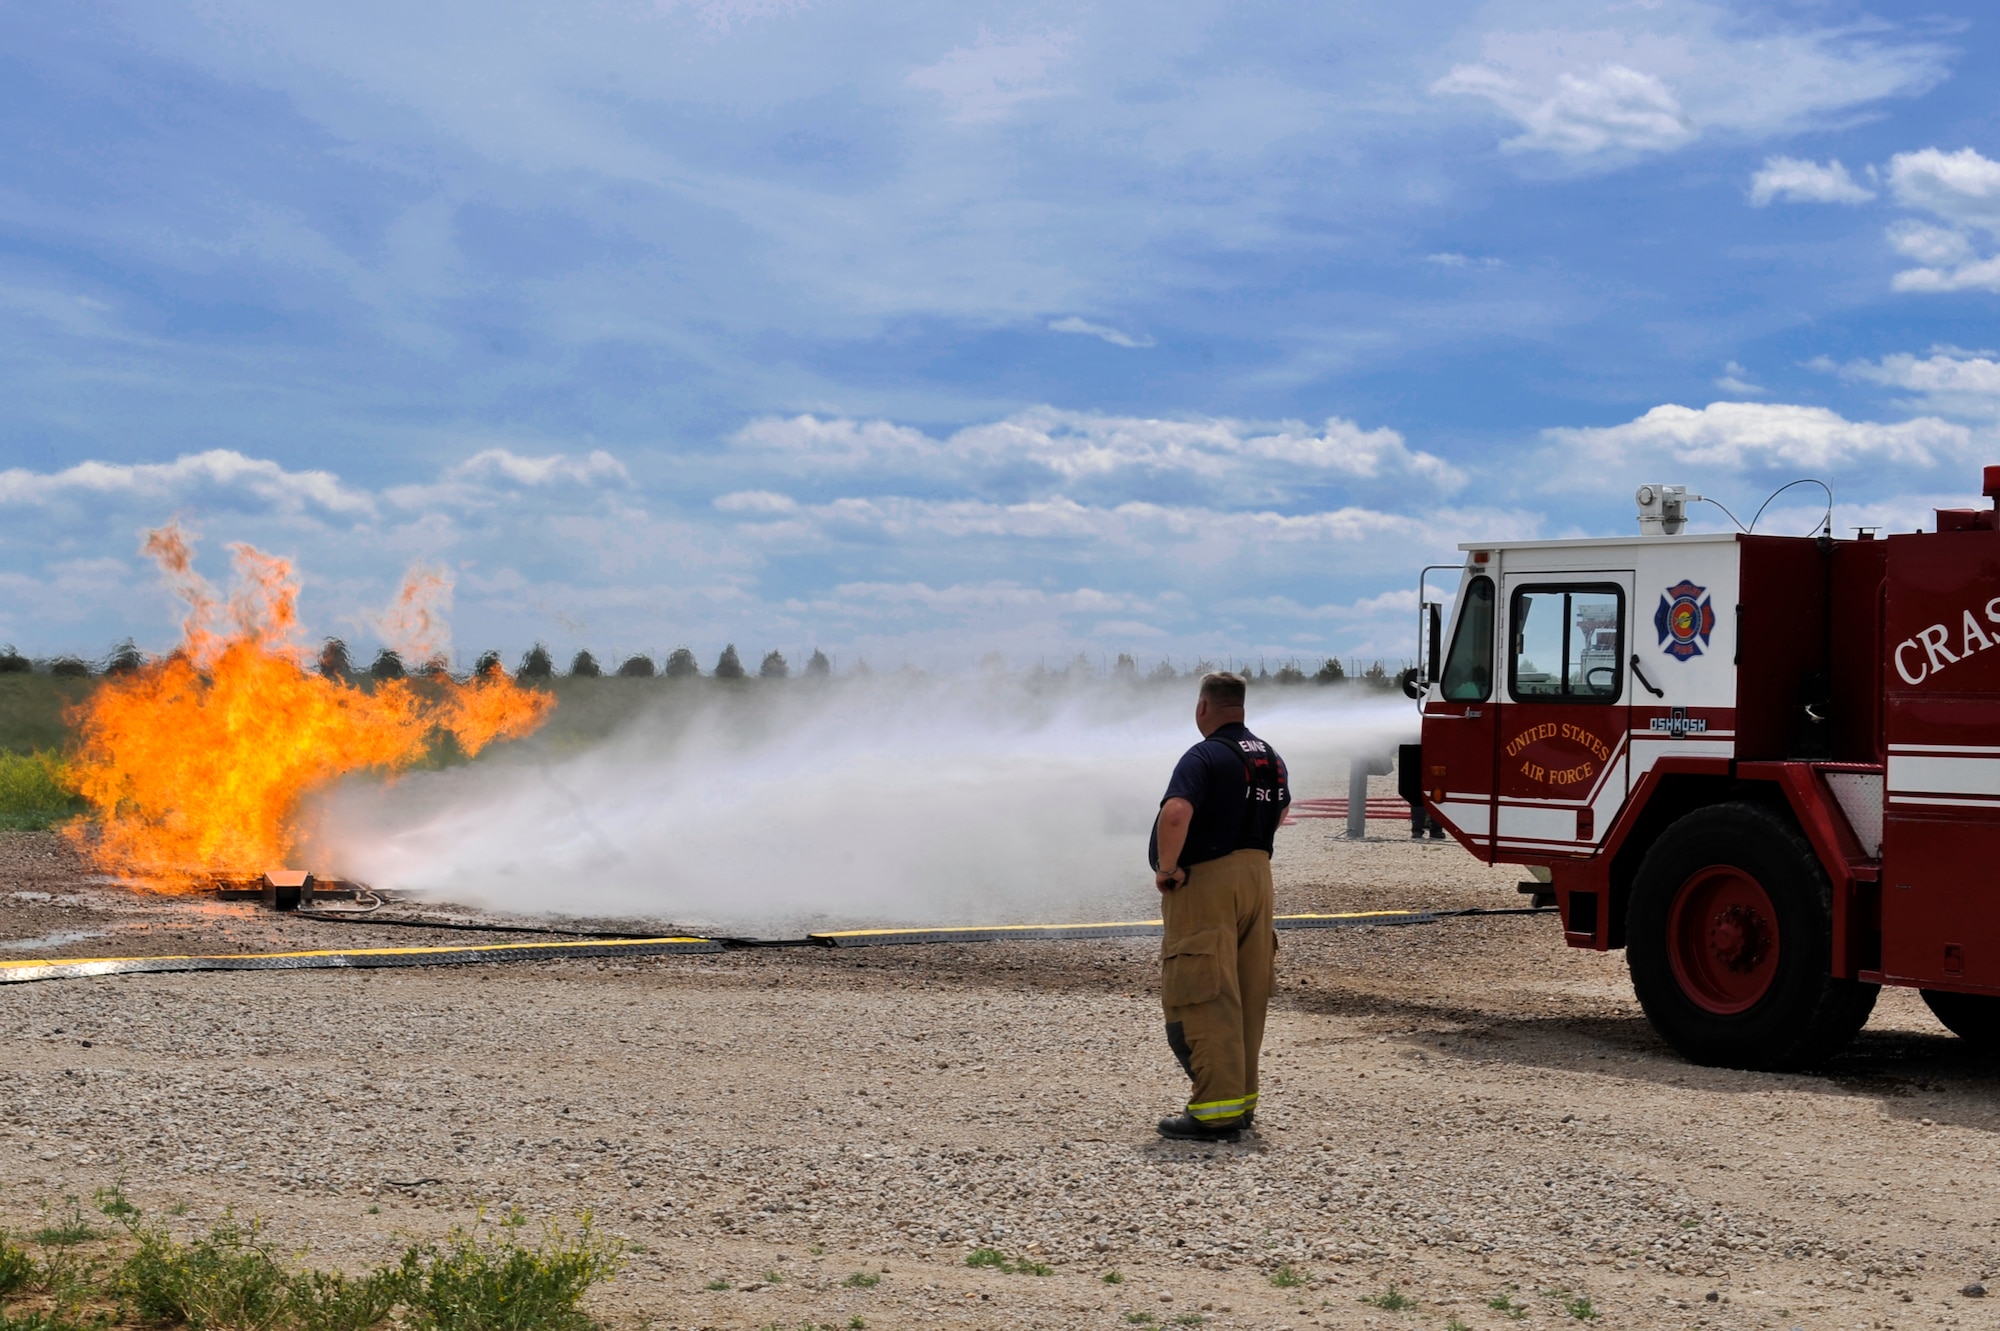 BUCKLEY AIR FORCE BASE, Colo. – Buckley Fire Department’s  rescue vehicle sprays water onto a fire during a training exercise May 30, 2012. Emergency response vehicles were used in the live-fire training for simulated fuel spills. (U.S. Air Force photo by Airman 1st Class Riley Johnson) 